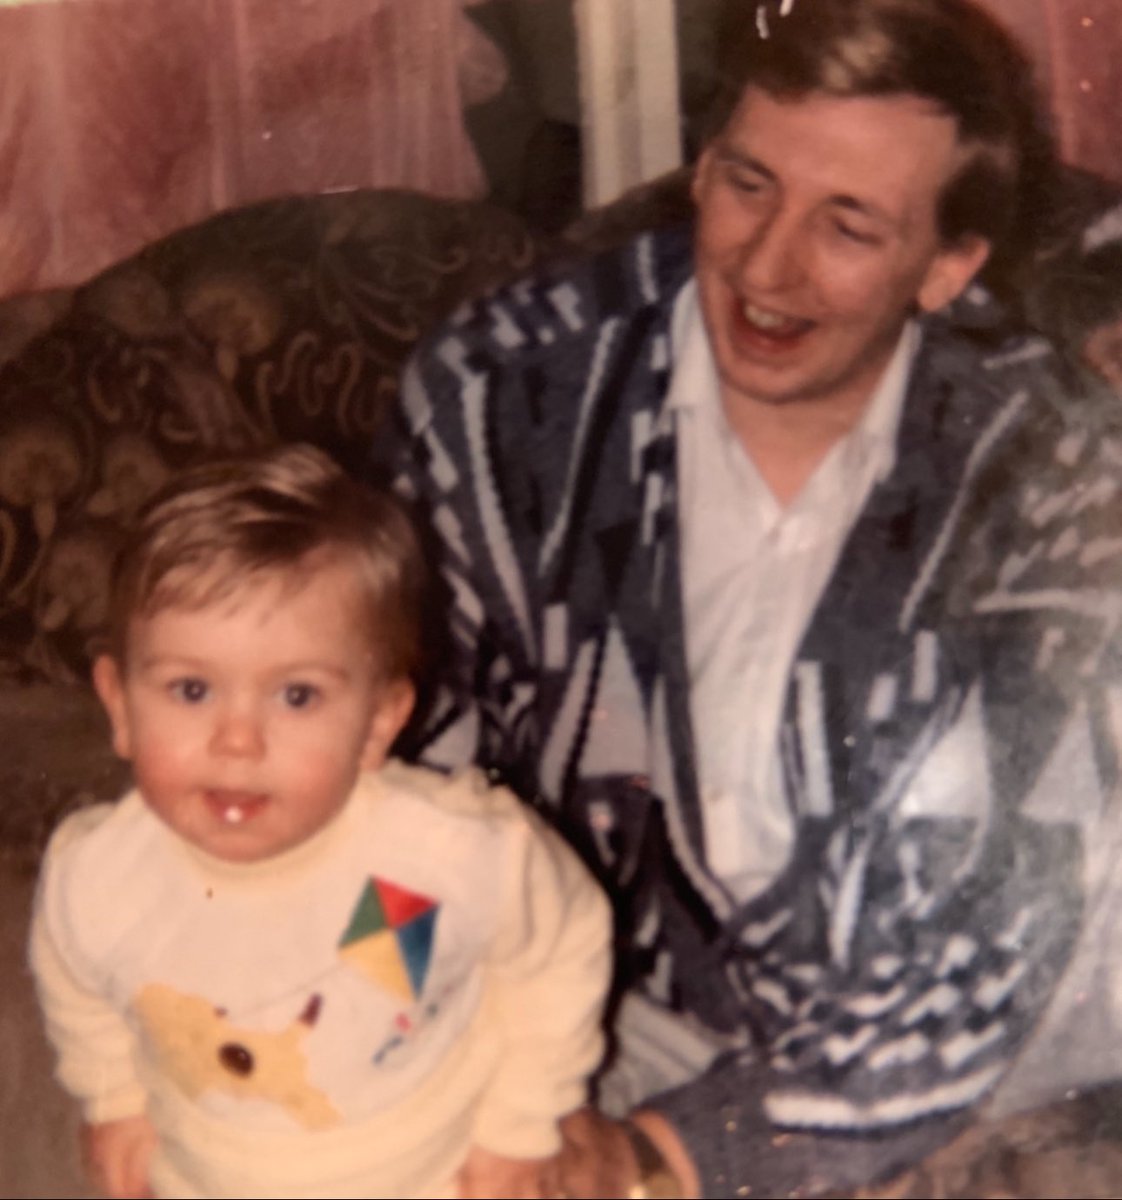 2 years since my Dad lost his battle with cancer. Not a day goes by that I don’t miss him. It’s just amplified on days like this. There’s so much gone on that I wish he had been here to see, especially my debut as Lakeside MC. Love you, Dad. 8/8/57-26/1/22 💜